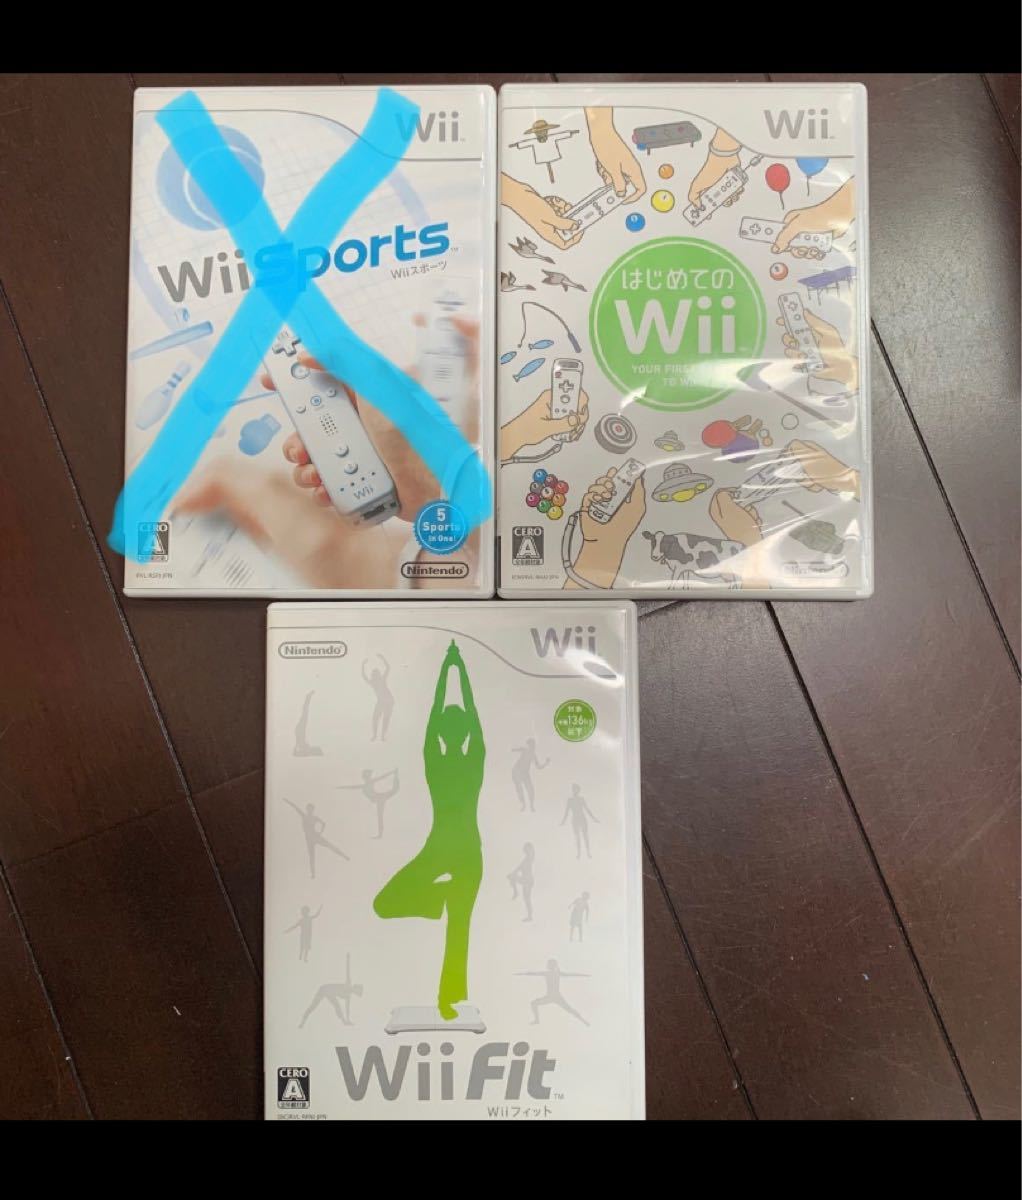  Wii Fit はじめてのwii